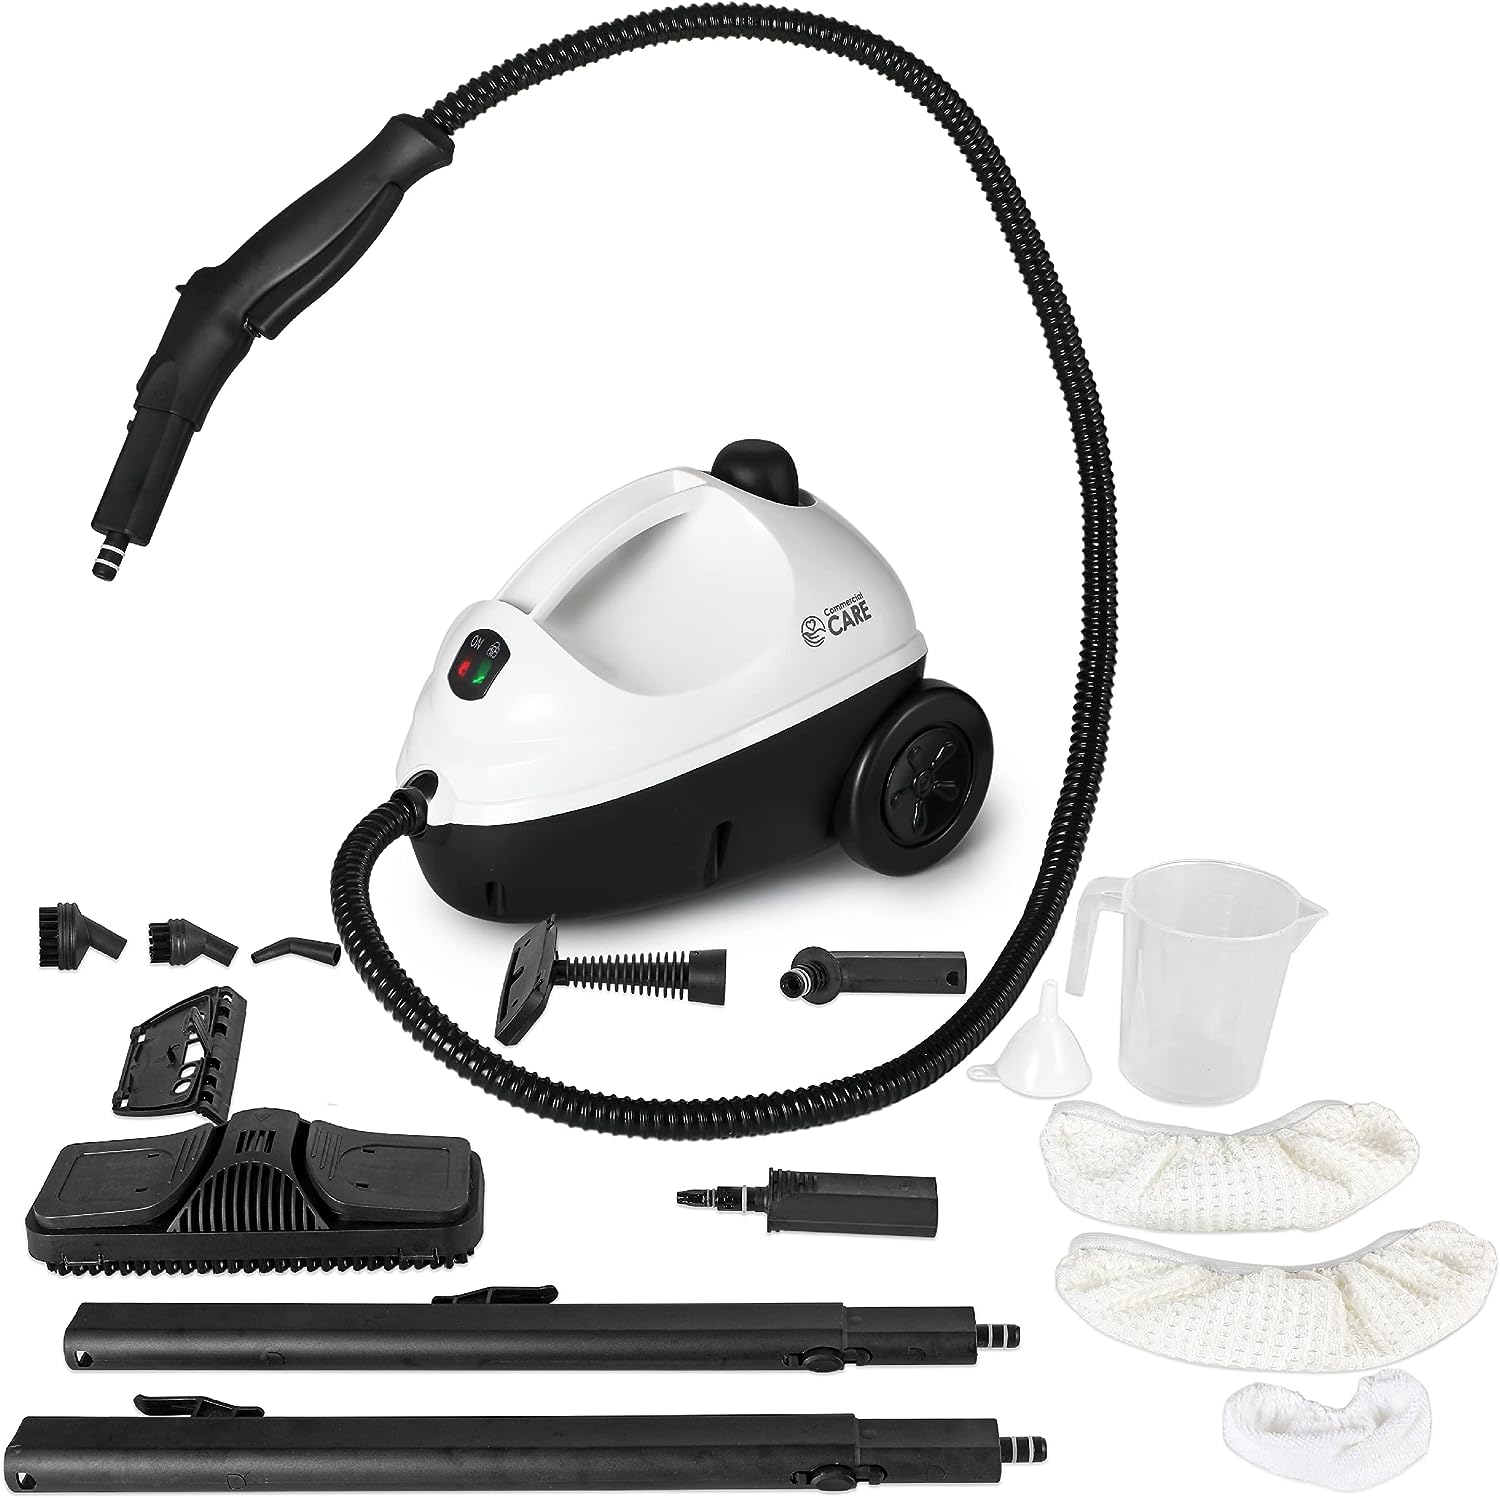 COMMERCIAL CARE Steam Cleaner, 1500W Multipurpose [...]